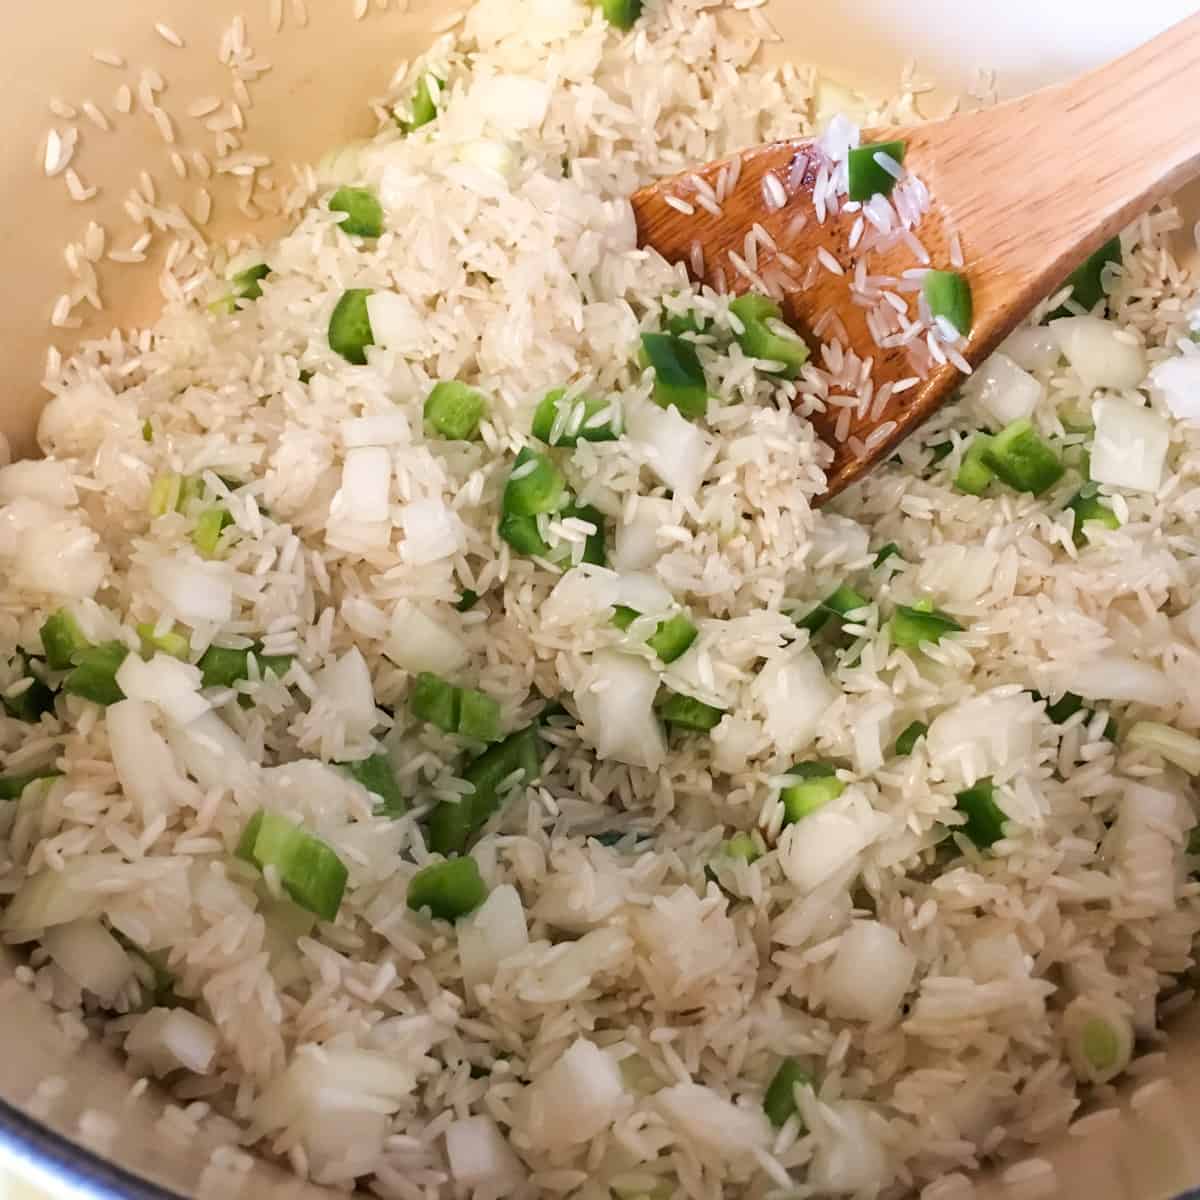 Diced onion, jalapeno and raw rice in a dutch oven.